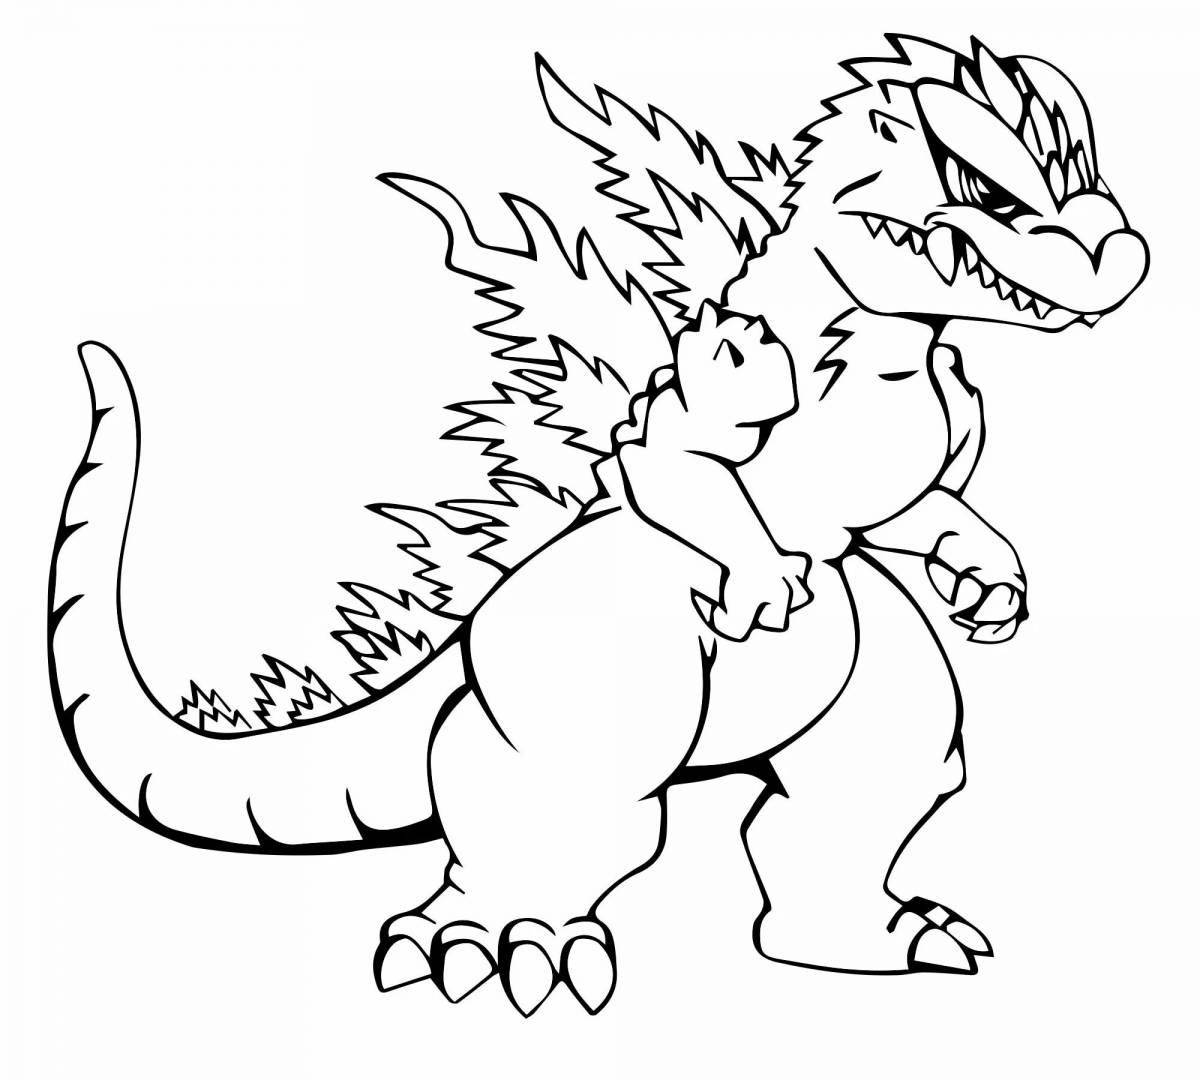 Generous Godzilla coloring pages for boys